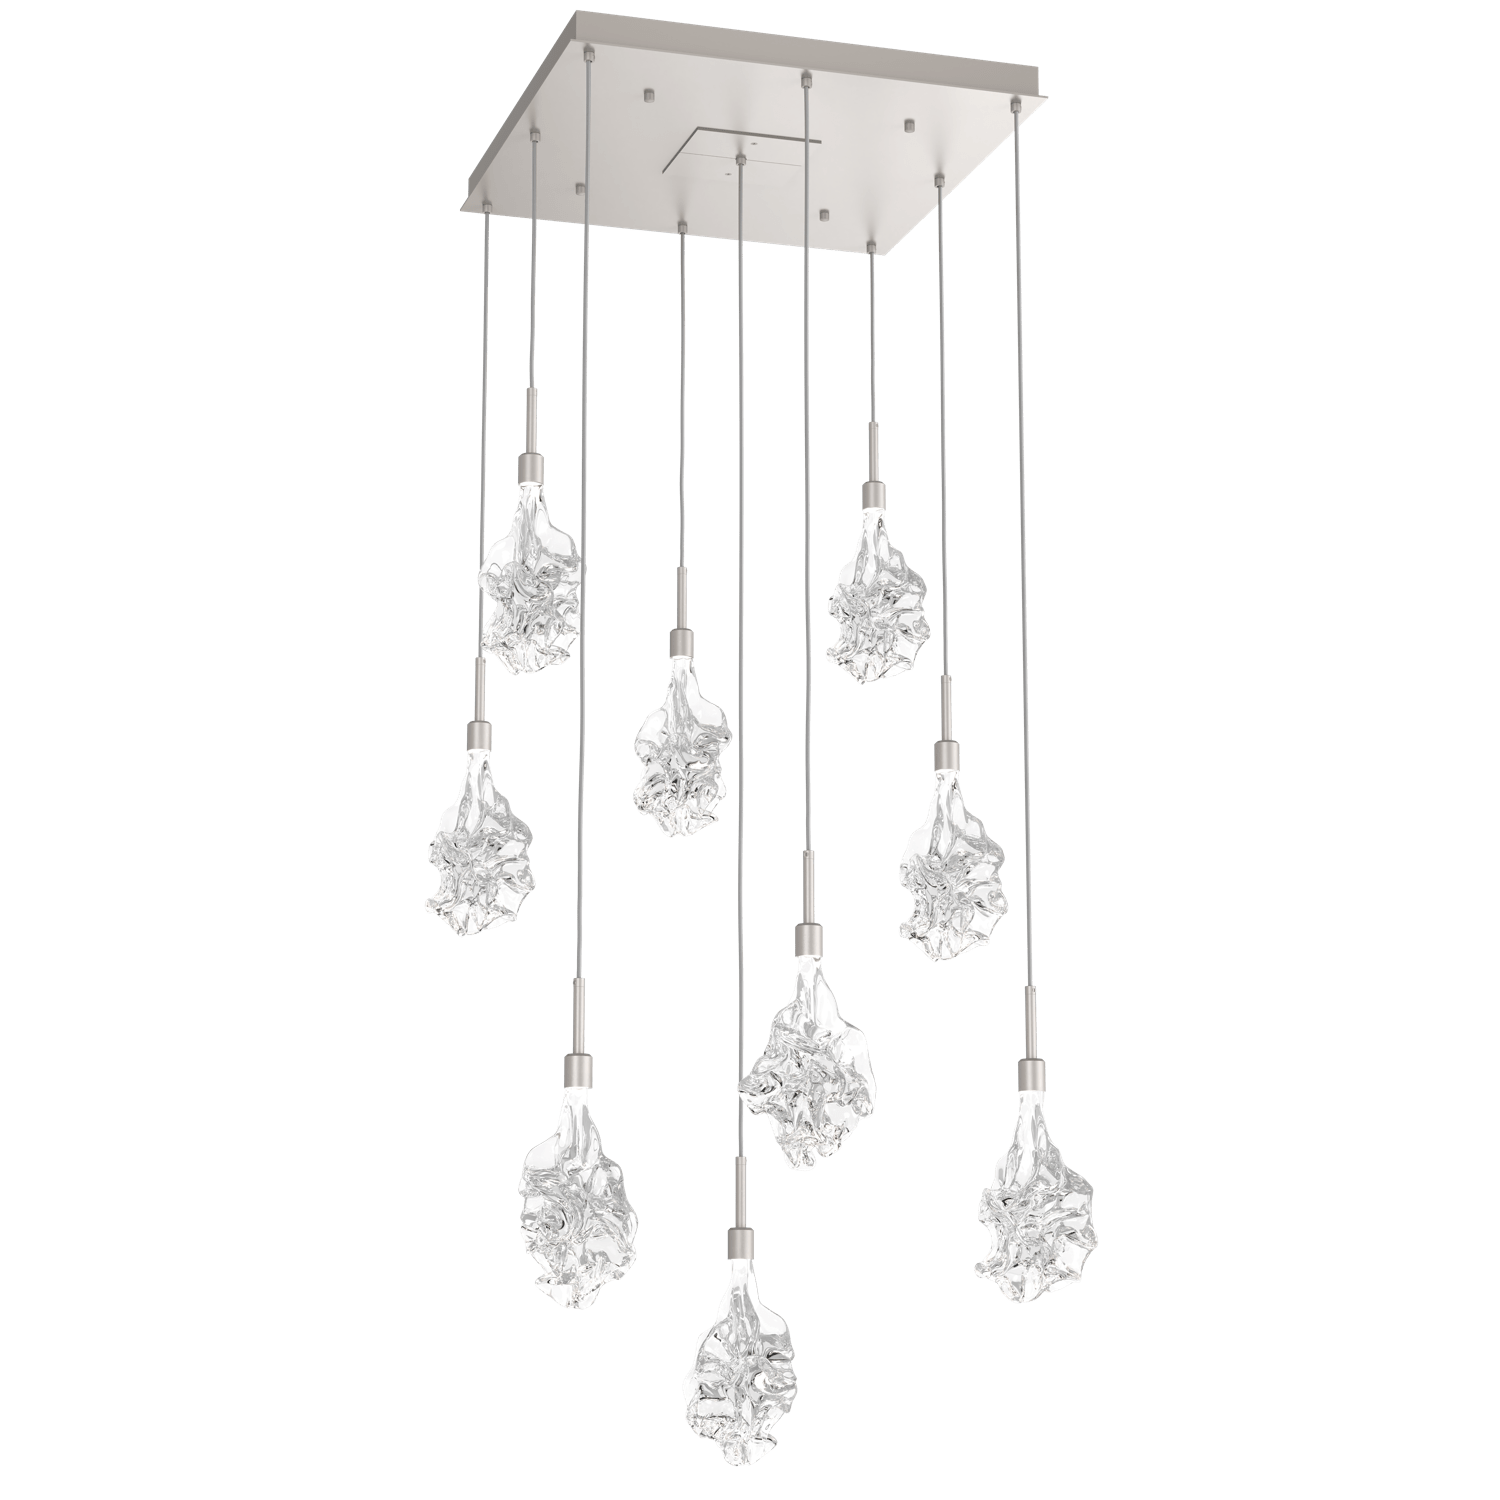 CHB0059-09-BS-Hammerton-Studio-Blossom-9-light-square-pendant-chandelier-with-metallic-beige-silver-finish-and-clear-handblown-crystal-glass-shades-and-LED-lamping